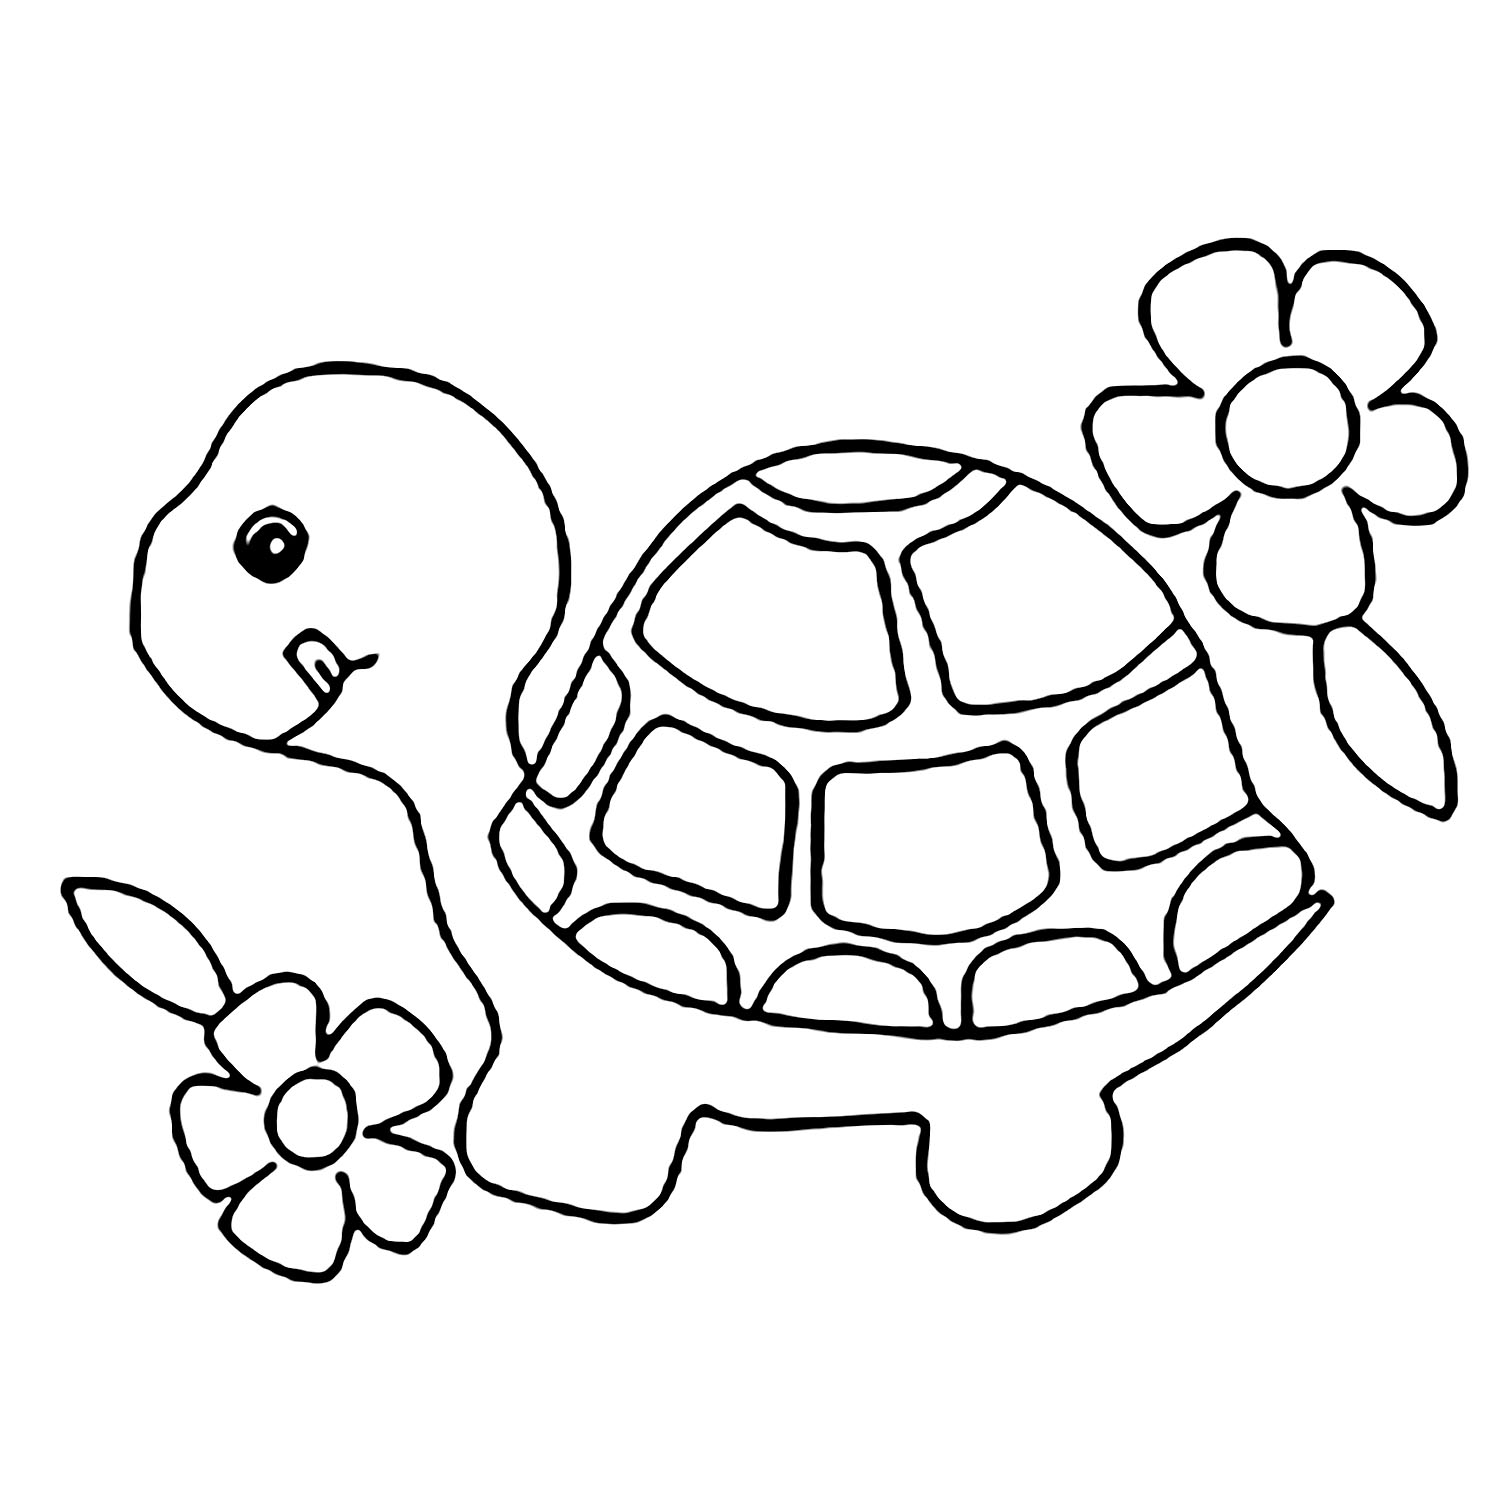 Turtles to download for free Turtles Kids Coloring Pages